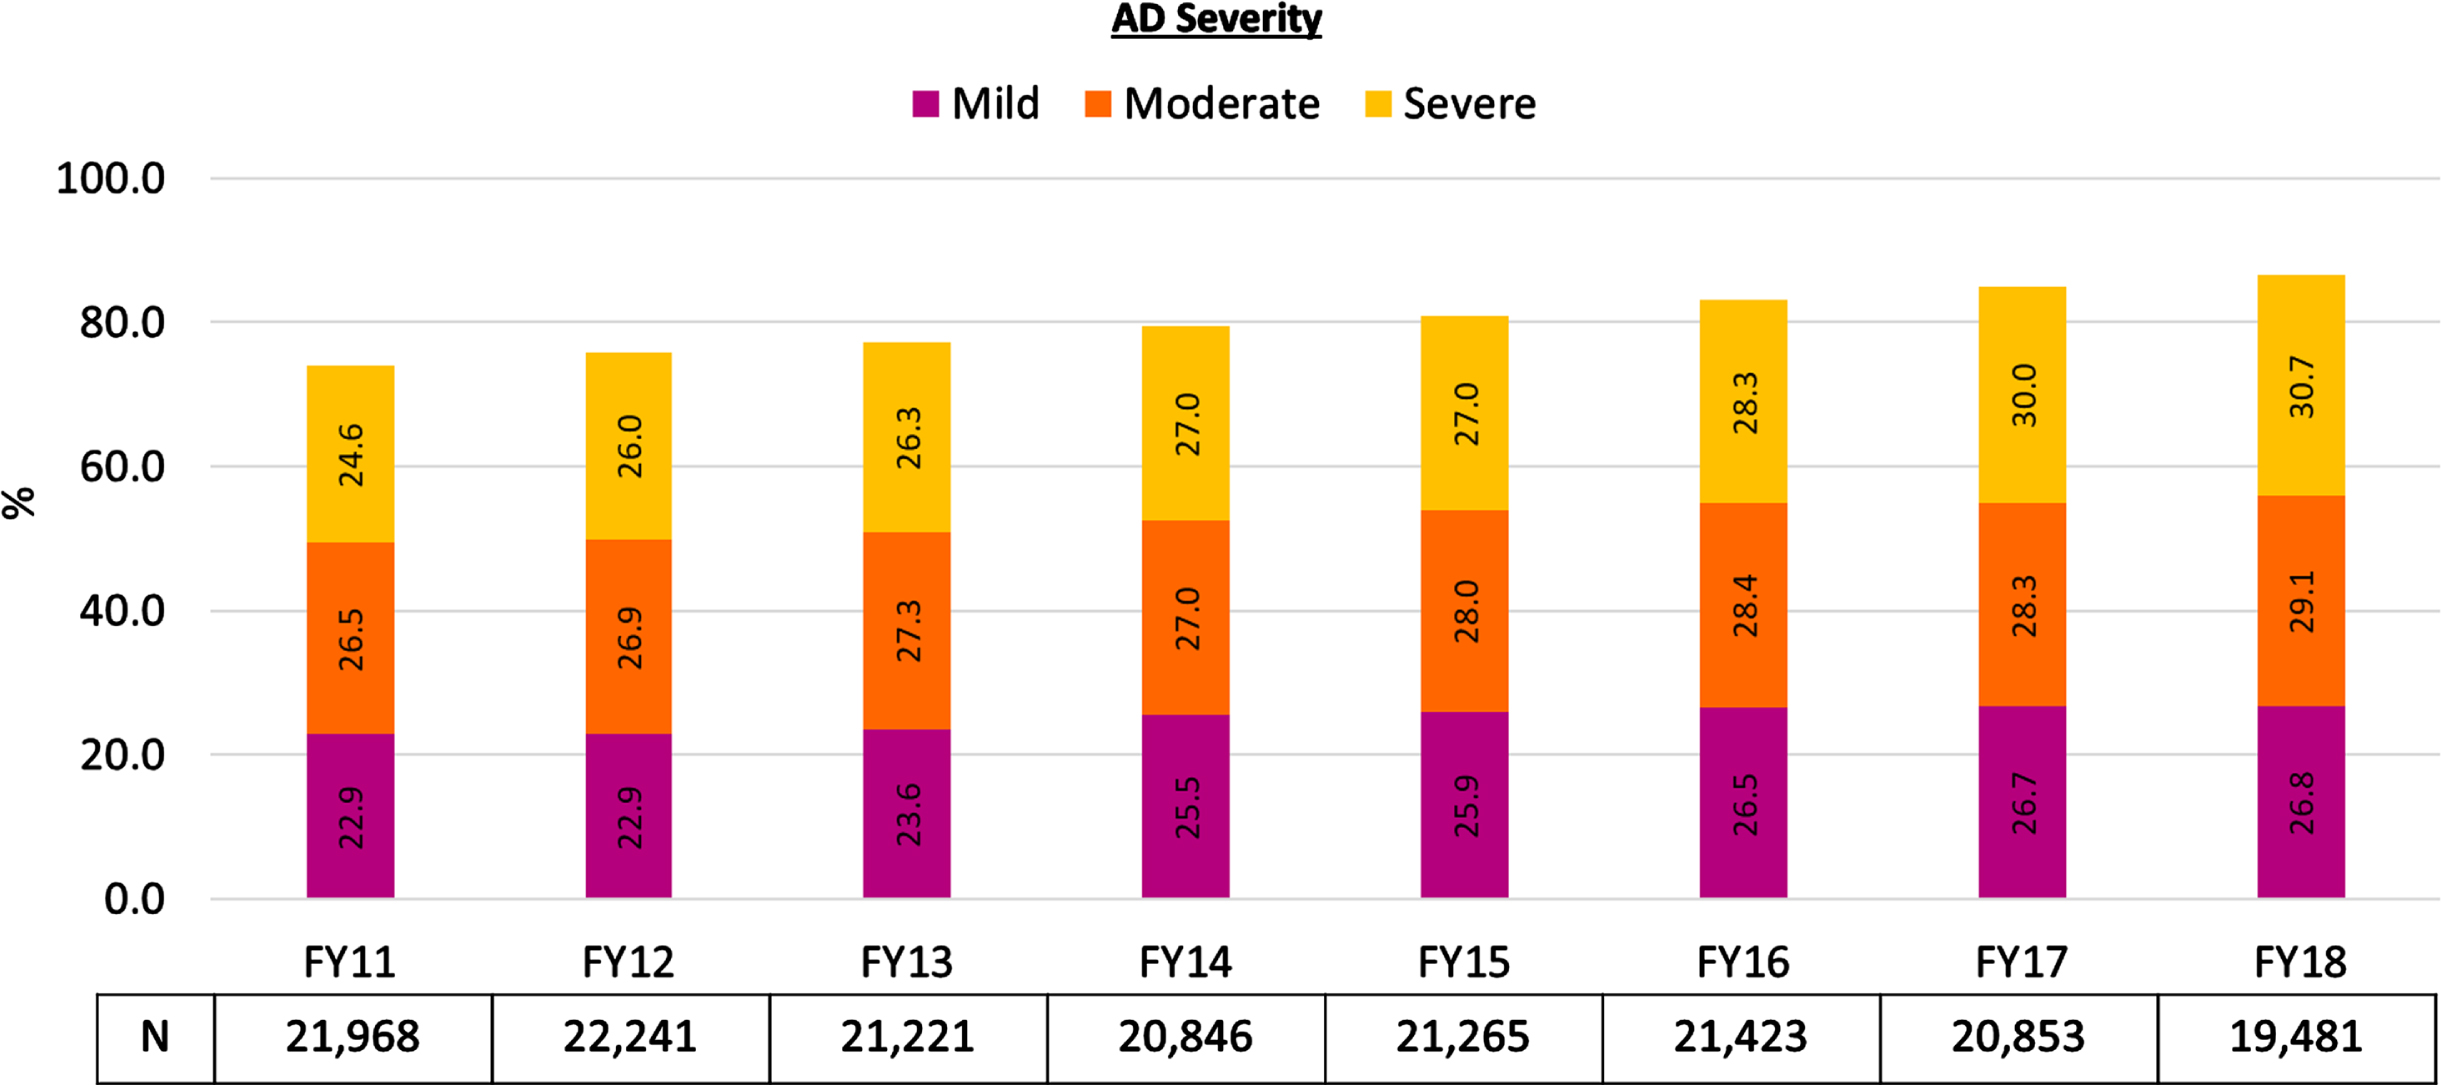 Proportion of Veterans with cognitive score-based AD staging in the mild, moderate, or severe ranges. aMMSE, Mini-Mental State Examination; MoCA, Montreal Cognitive Assessment. aThe following proportions of Veterans had cognitive test scores in non-dementia ranges: 26% in FY 2011; 24.2% in FY 2012; 22.8% in FY 2013; 20.5% in FY 2014; 19.1% in FY 2015; 16.8% in FY 2016; 15% in FY 2017; 13.4% in FY 2018. The N-value listed under each FY represents all Veterans in that FY who (1) met the accumulating case definition for an AD diagnosis and (2) had cognitive test scores from MMSE or MoCA that could be extracted from their clinical notes.